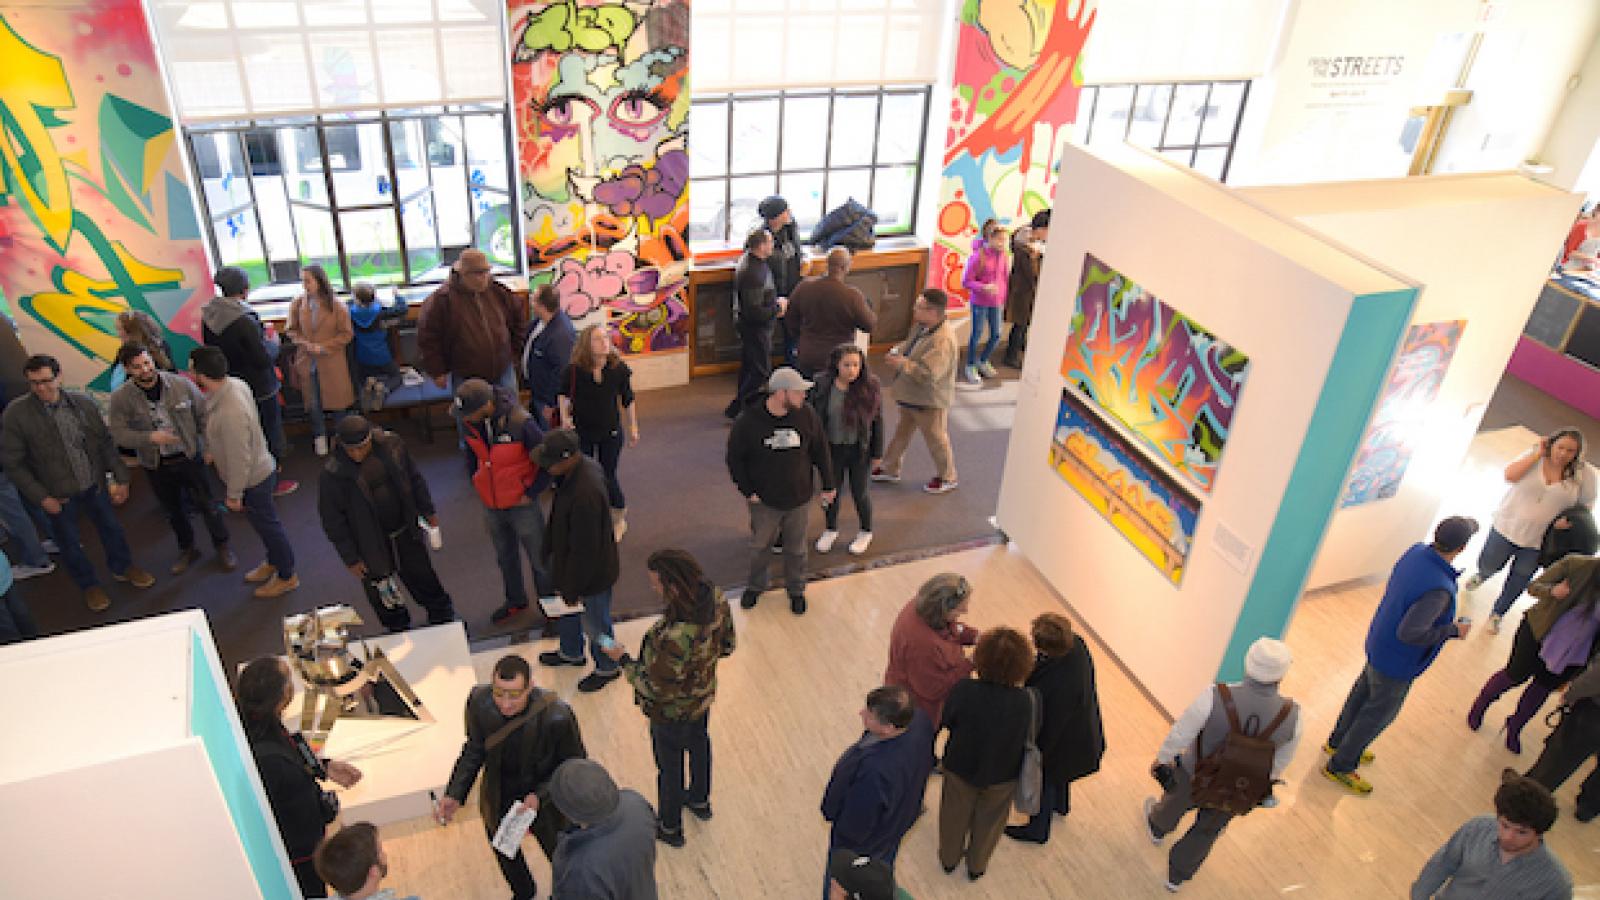 a crowd gathers in an exhibit space with graffiti-inspired artwork is on view